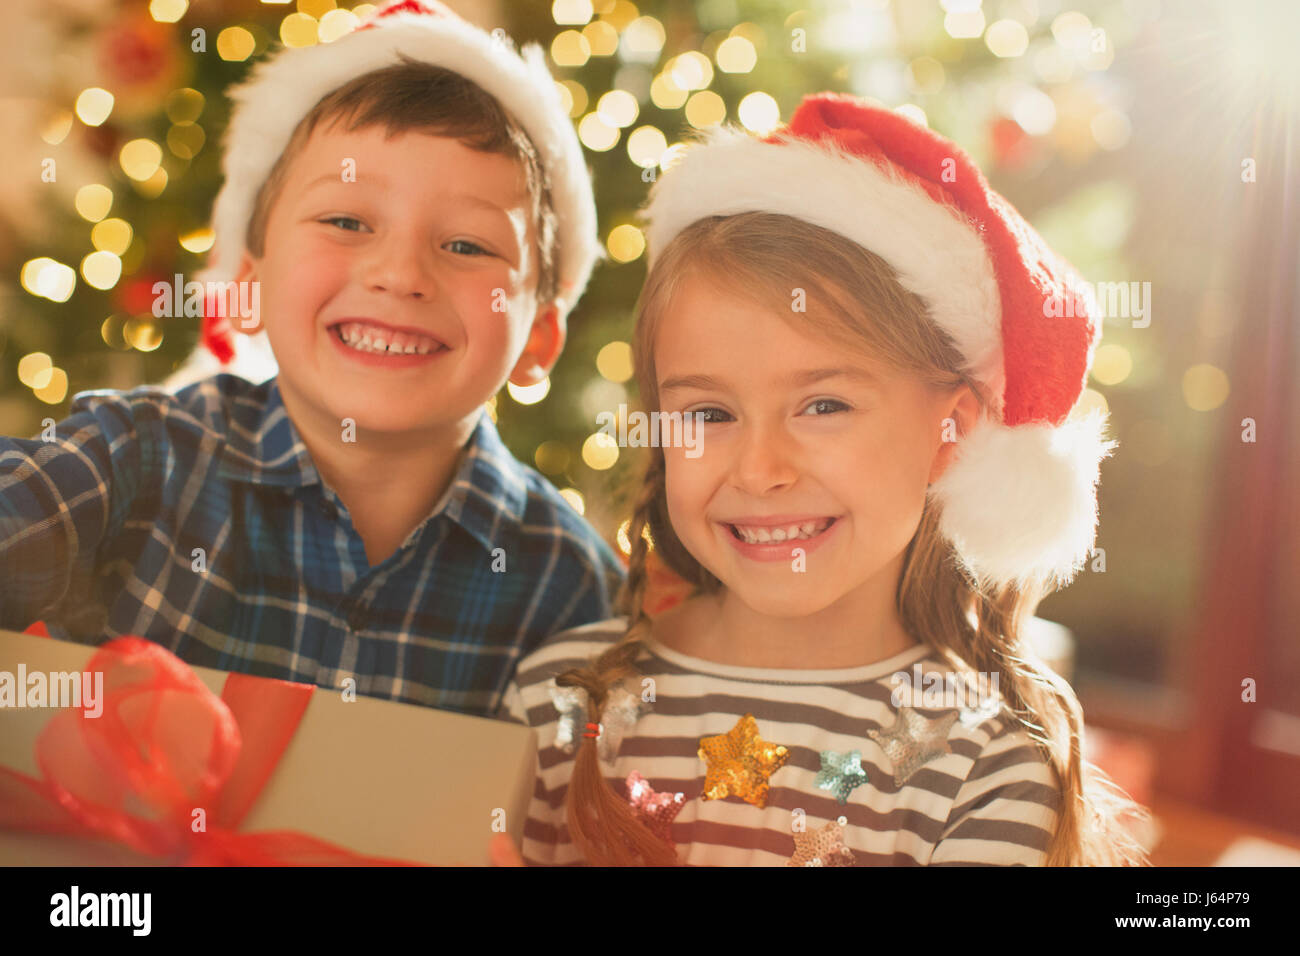 Portrait smiling, enthusiastic brother and sister wearing Santa hats holding Christmas gift Stock Photo